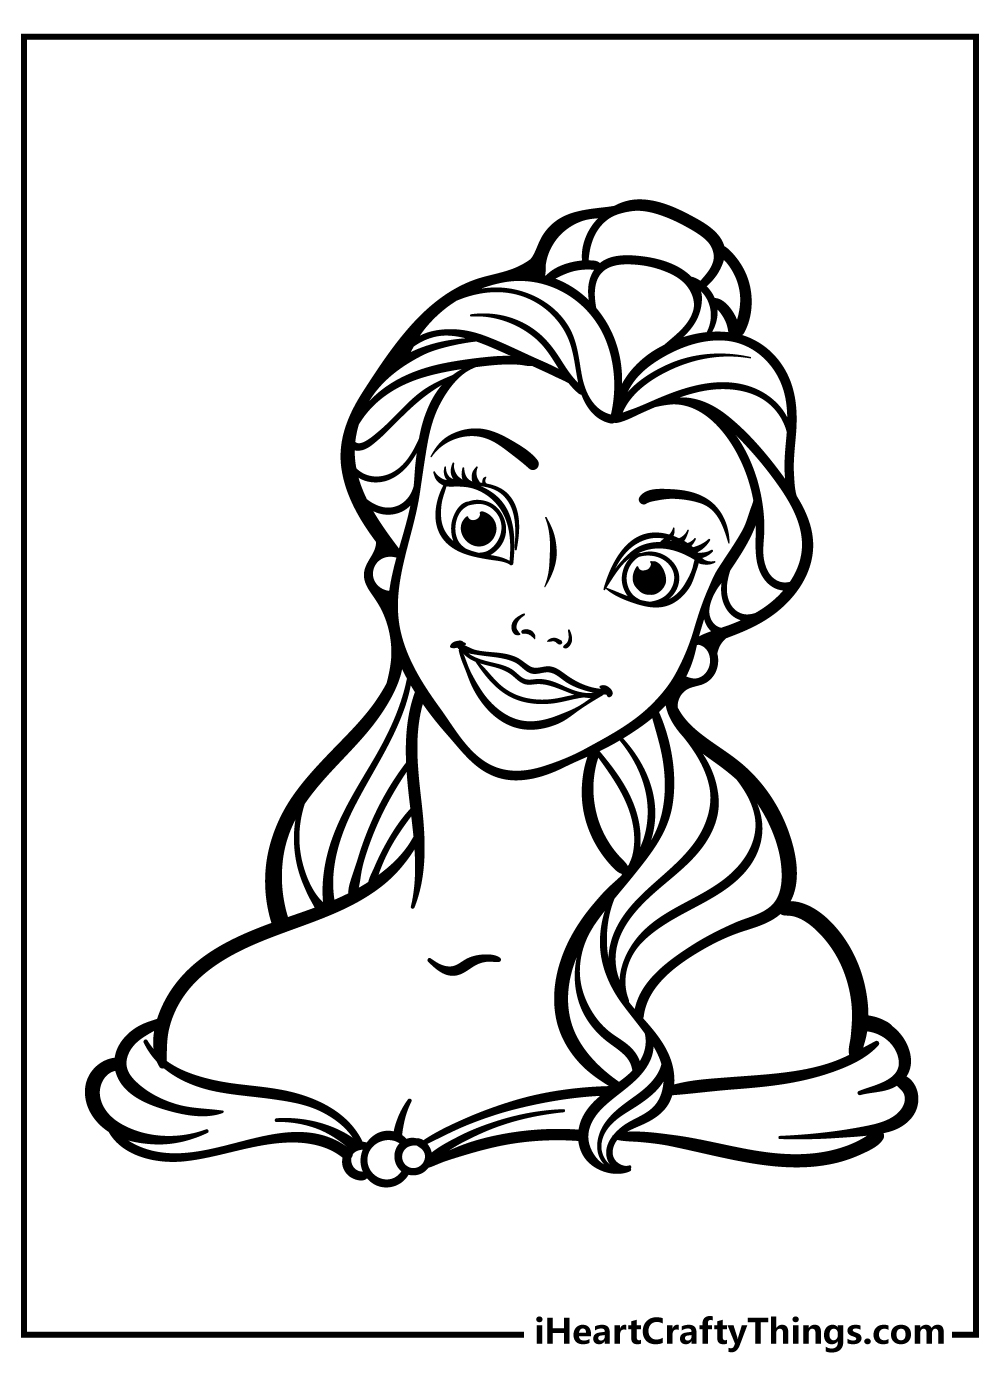 Belle coloring pages free printables